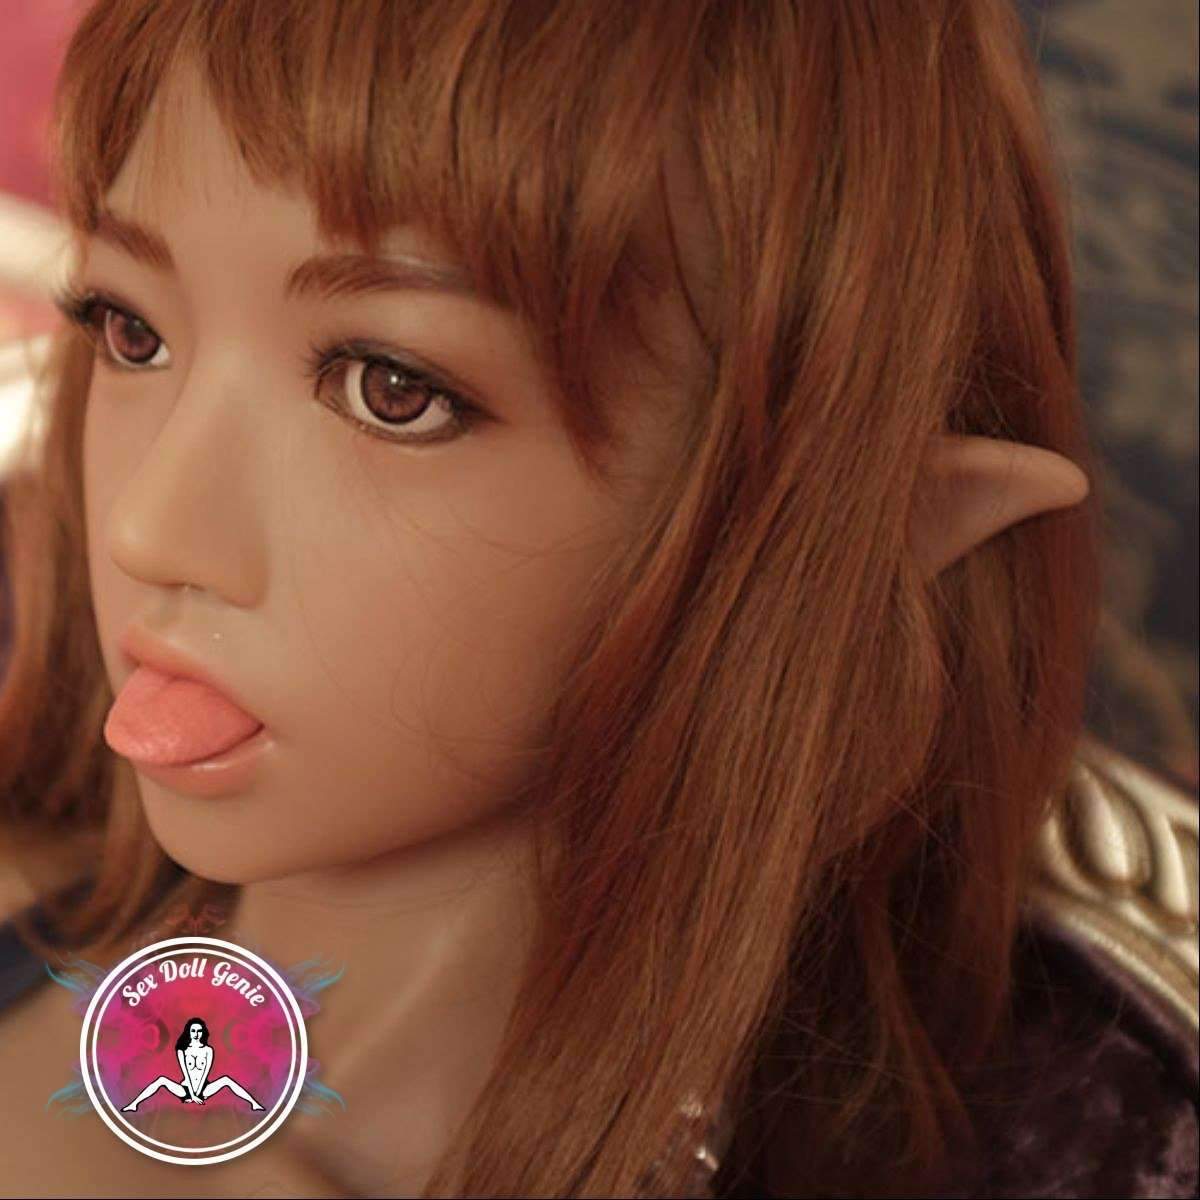 DS Doll - 163Plus - Samantha (Elf) Head - Type 1 D Cup Silicone Doll-7